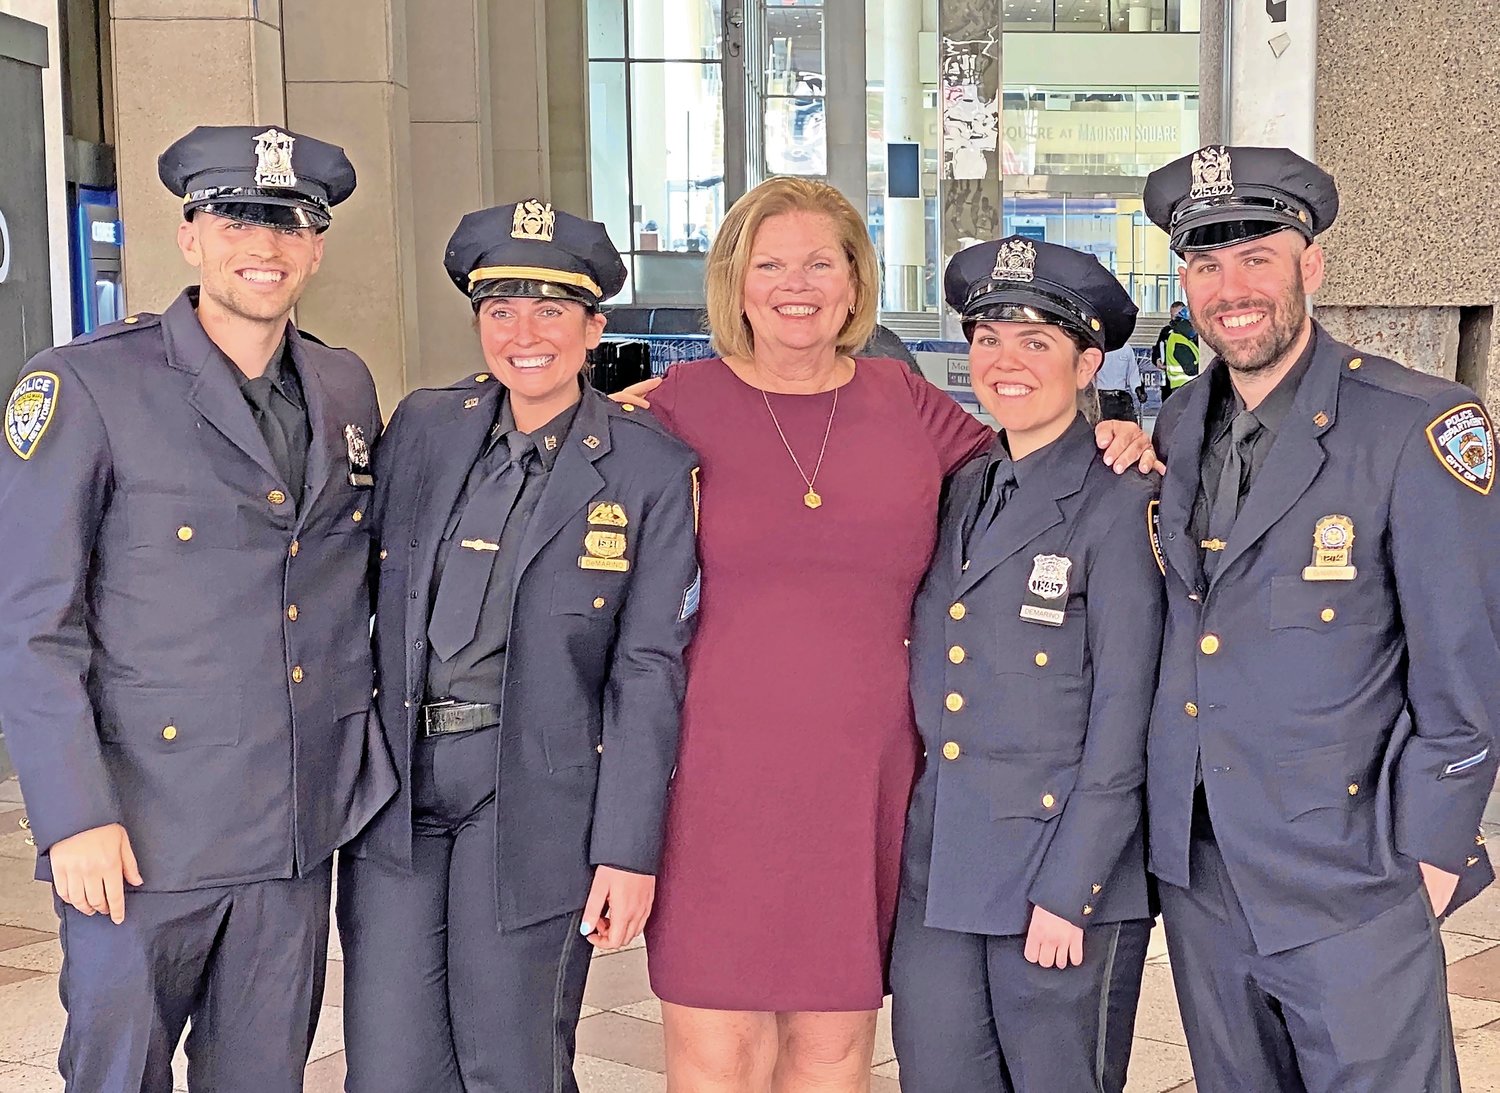 Michael DeMarino, far left, with his siblings Nicole, Morgan and Vincent and their mother, Charlene. All four of the elder Vincent’s children grew up to become first responders.